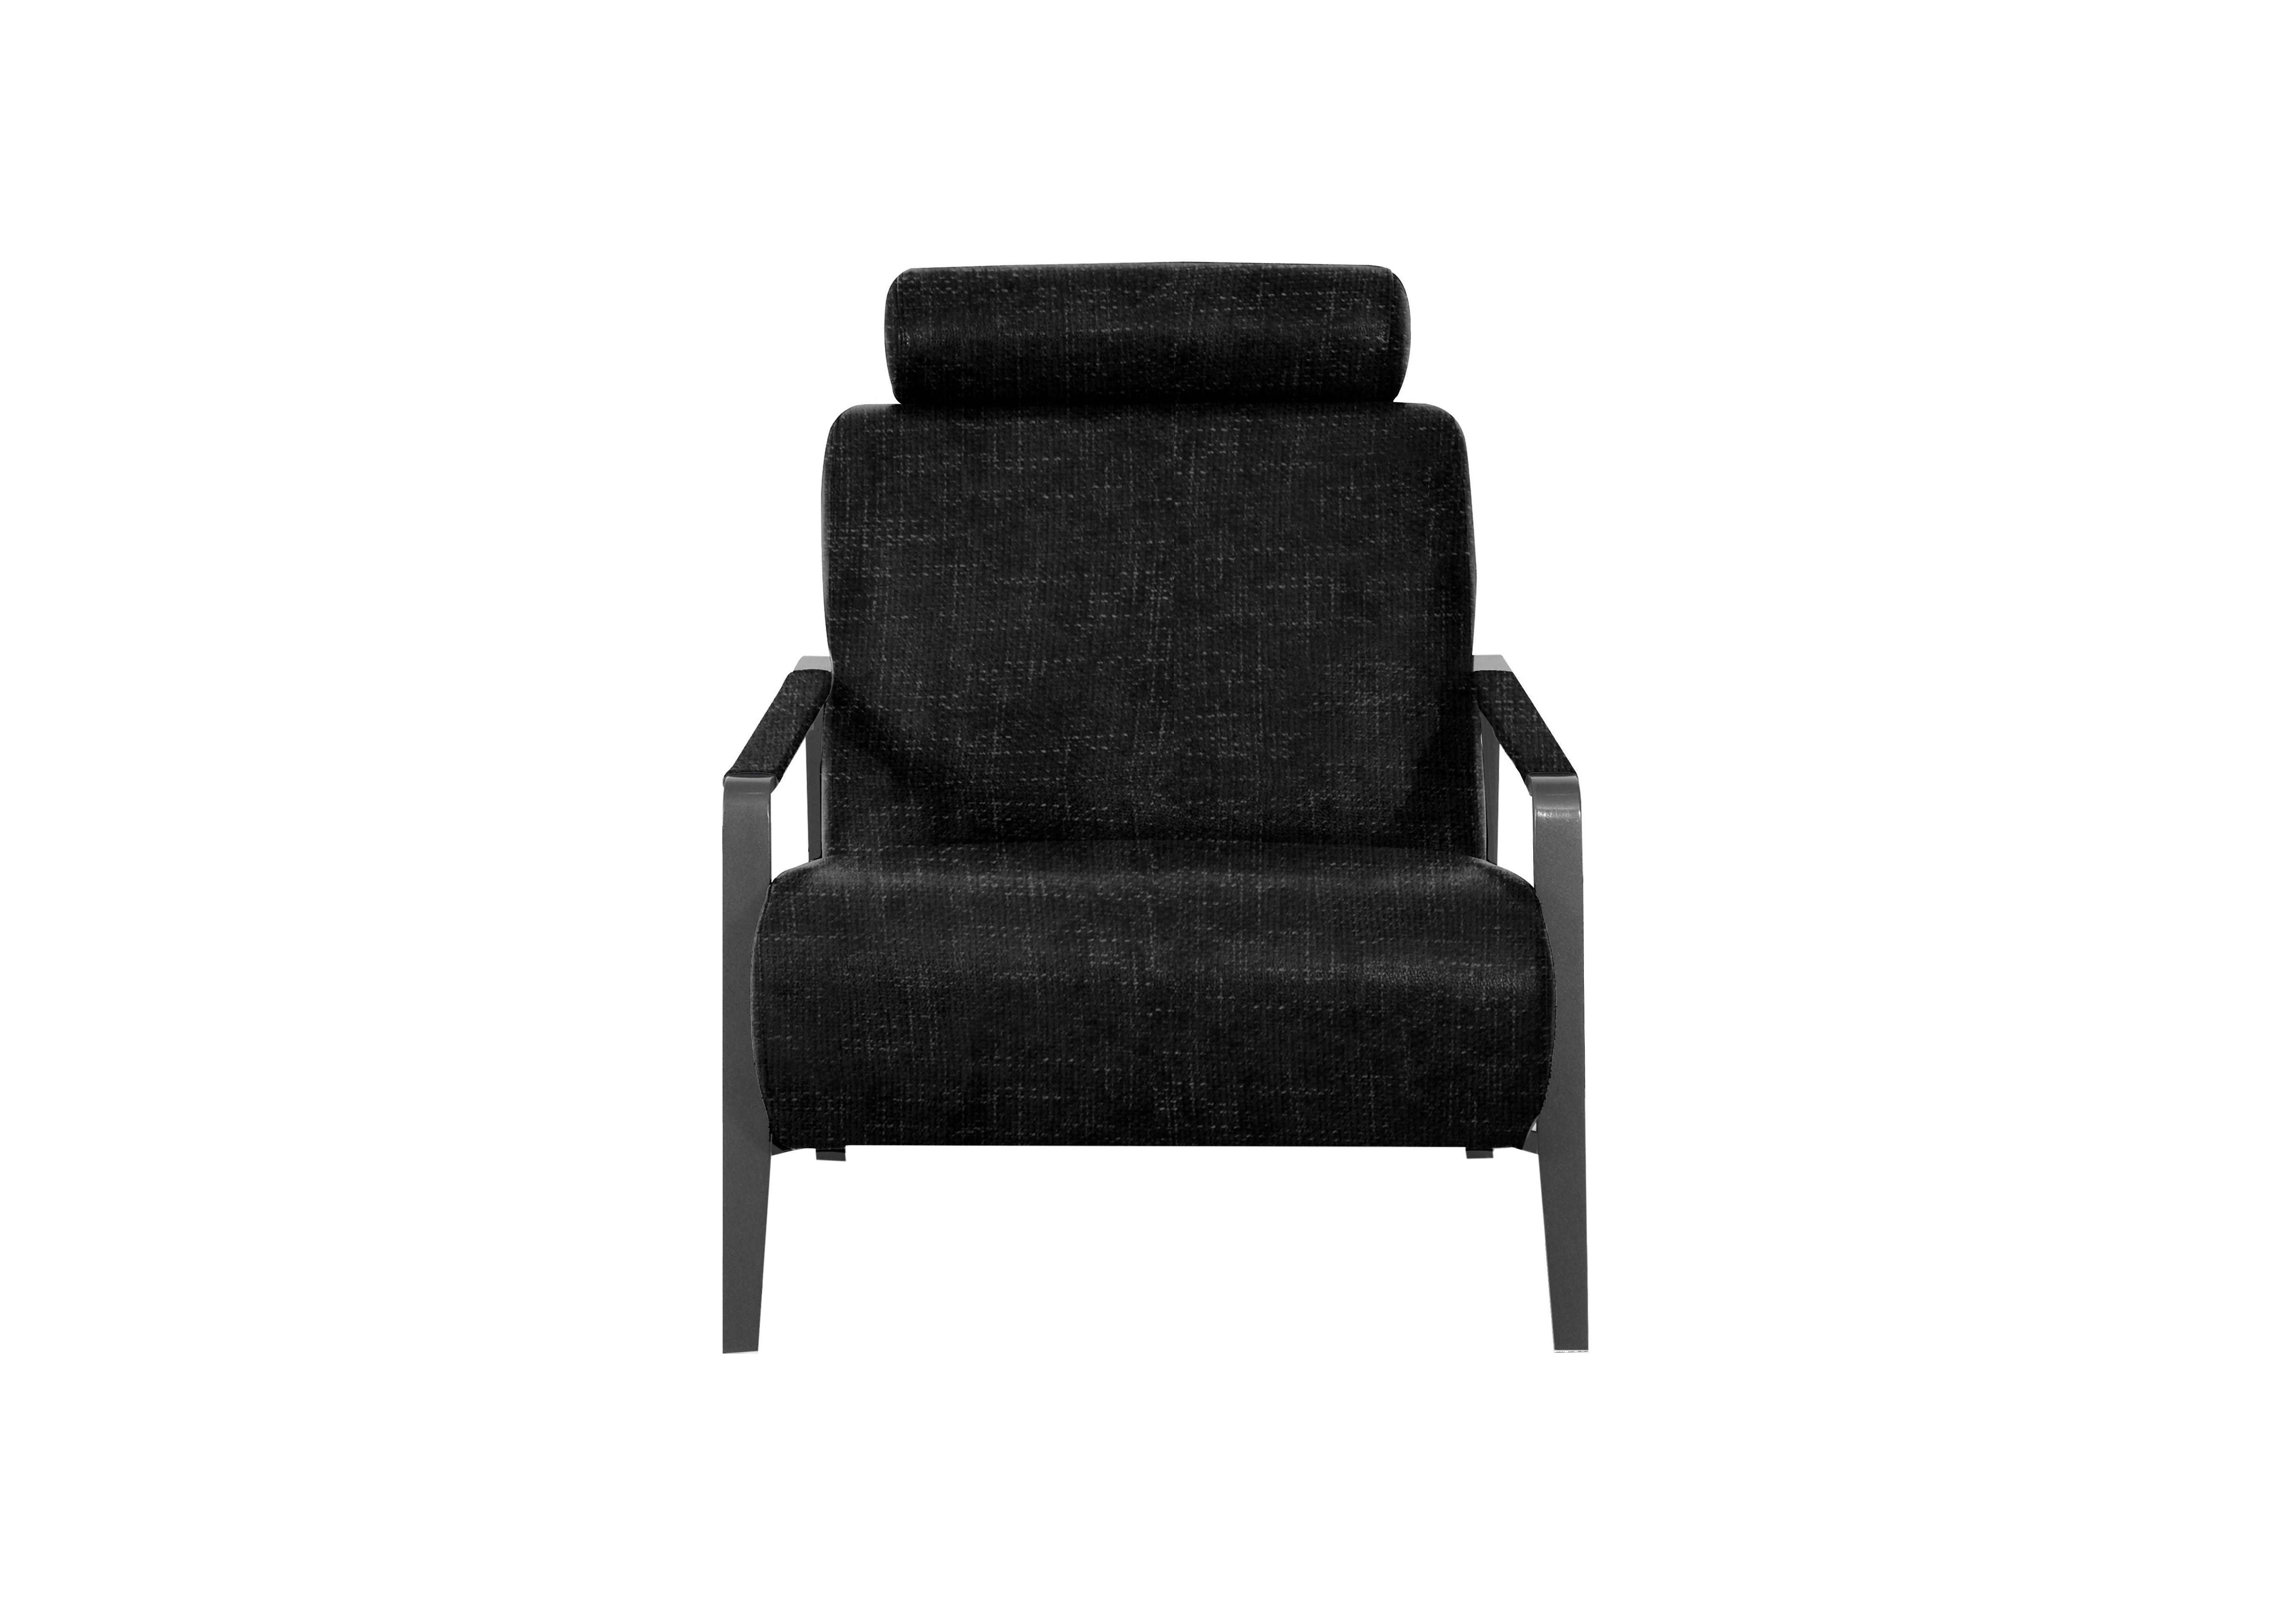 Lawson Fabric Accent Chair in Fab-Cac-R463 Black Mica on Furniture Village